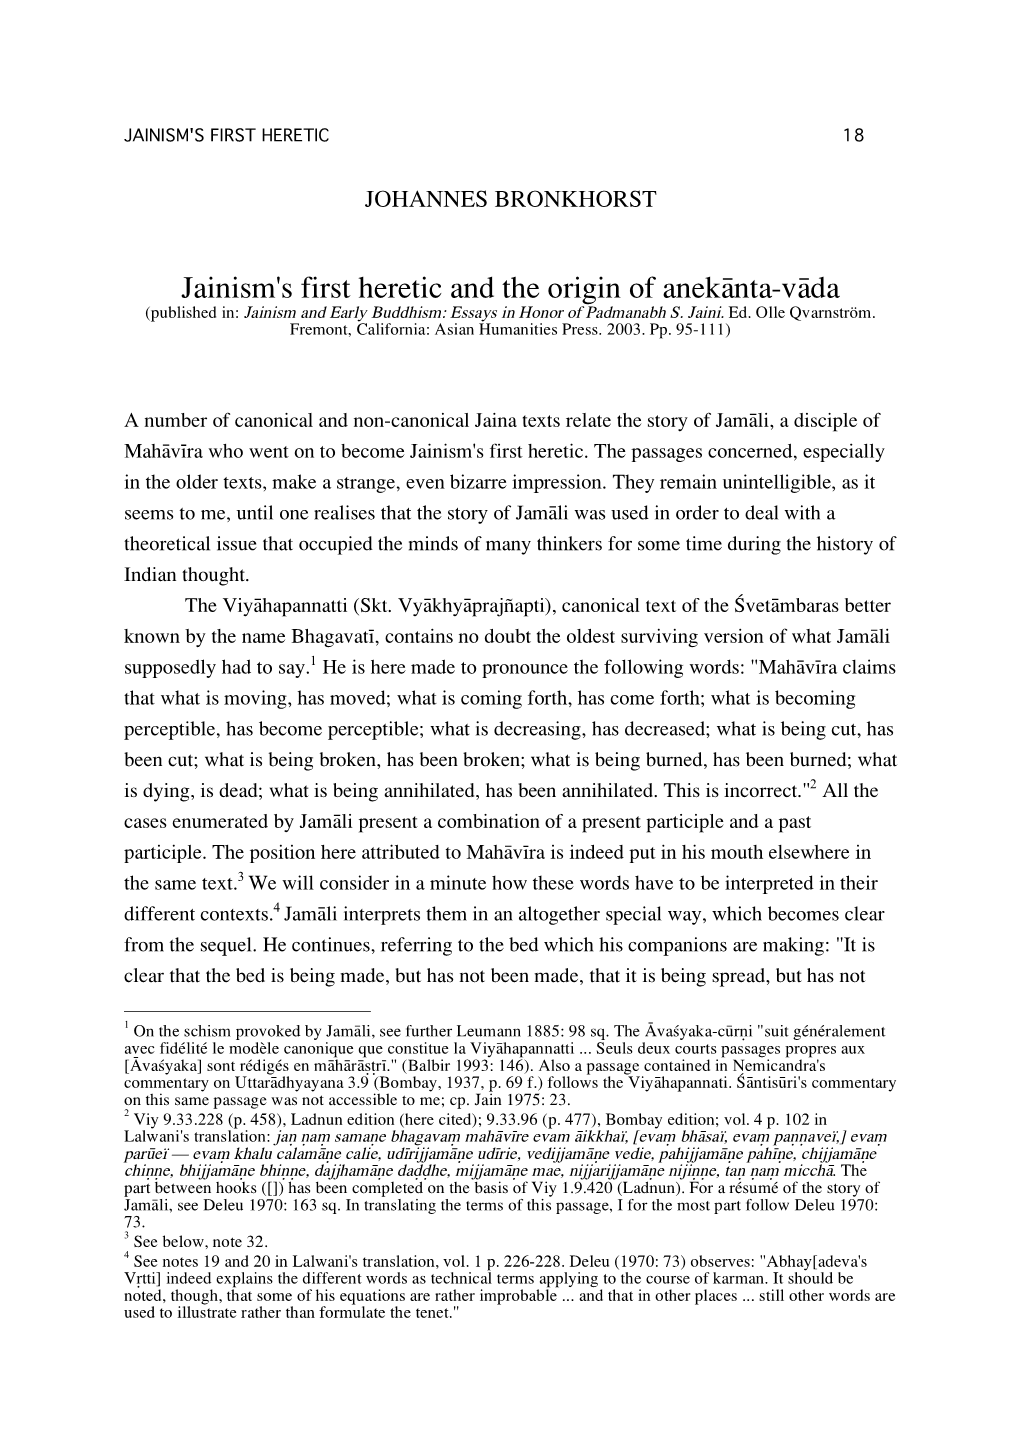 Jainism's First Heretic and the Origin of Anekånta-Våda (Published In: Jainism and Early Buddhism: Essays in Honor of Padmanabh S